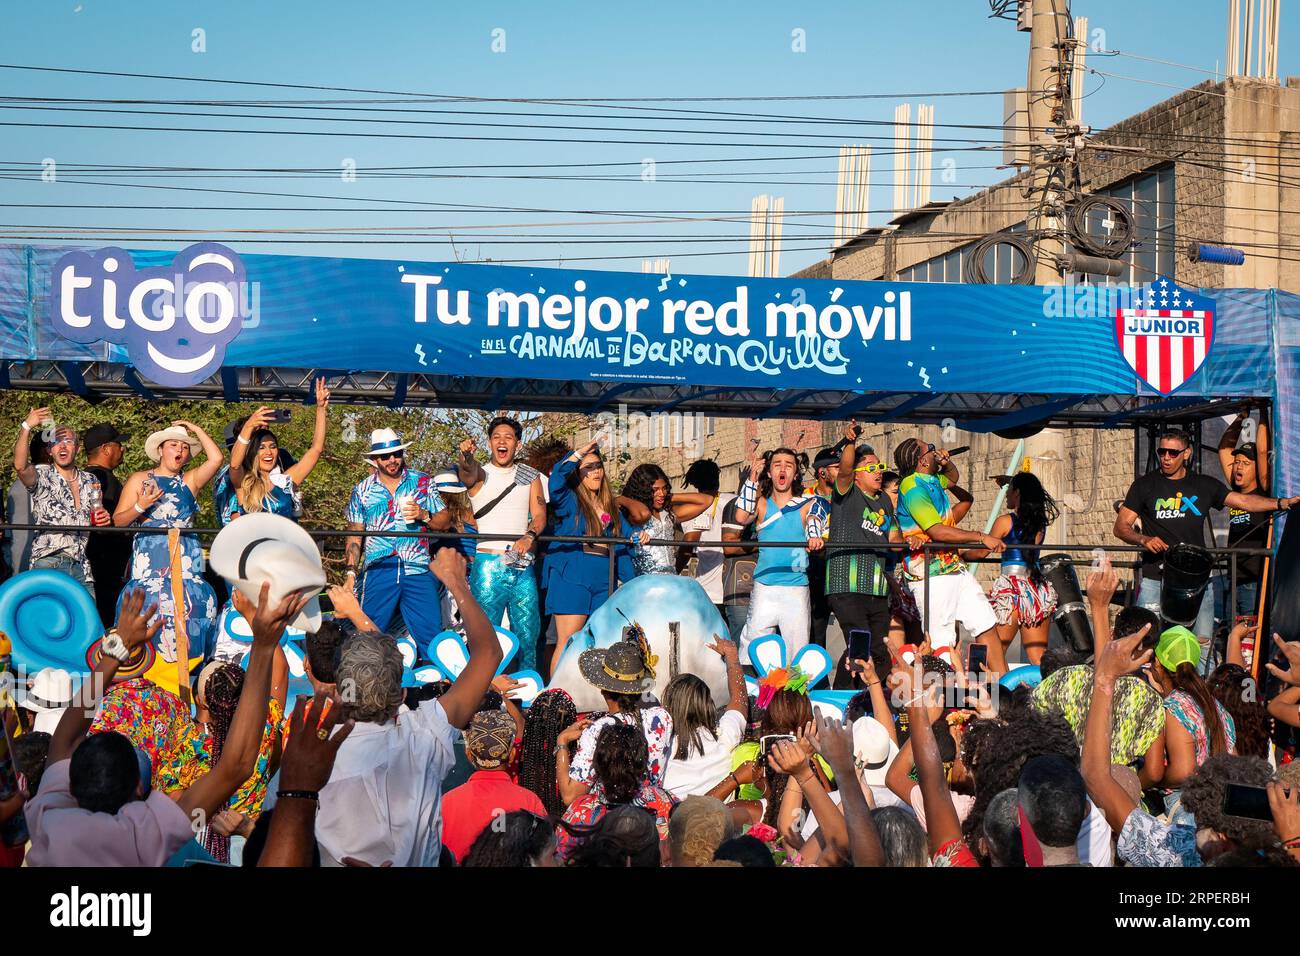 Barranquilla, Atlantico, Colombia - February 18 2023: Men and Women Dressed in Blue on a Float in the Carnival Parade Wave to a Crowd Stock Photo